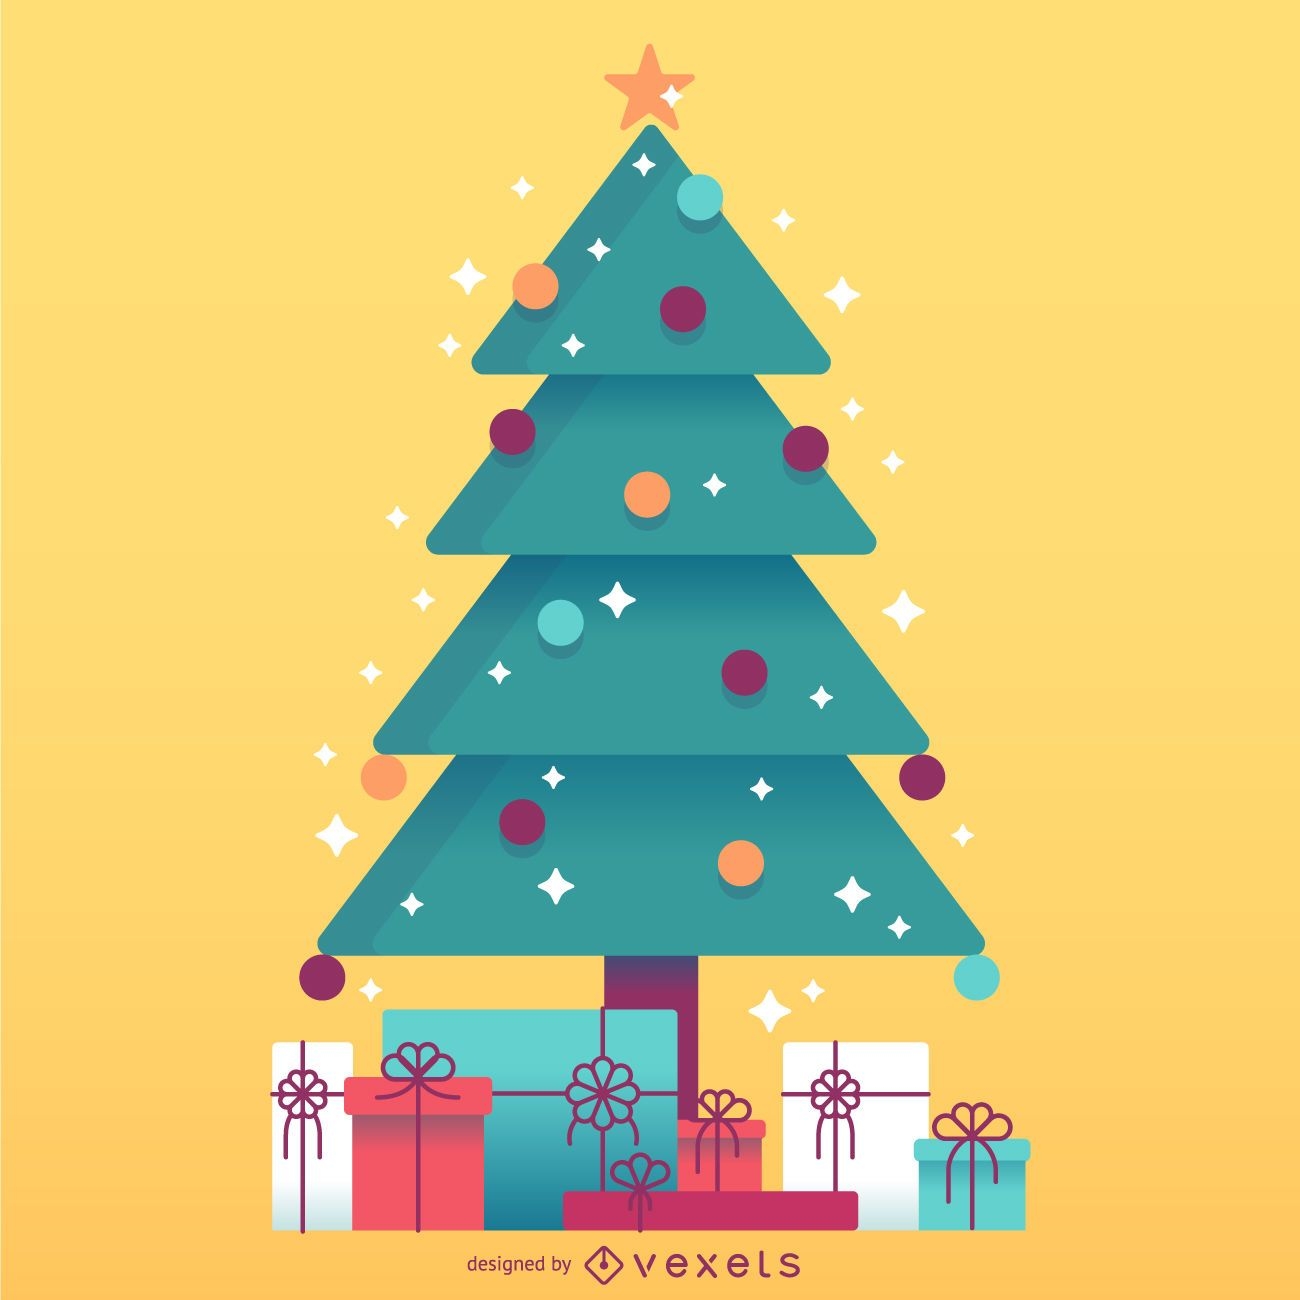 Christmas tree with gifts illustration - Vector download